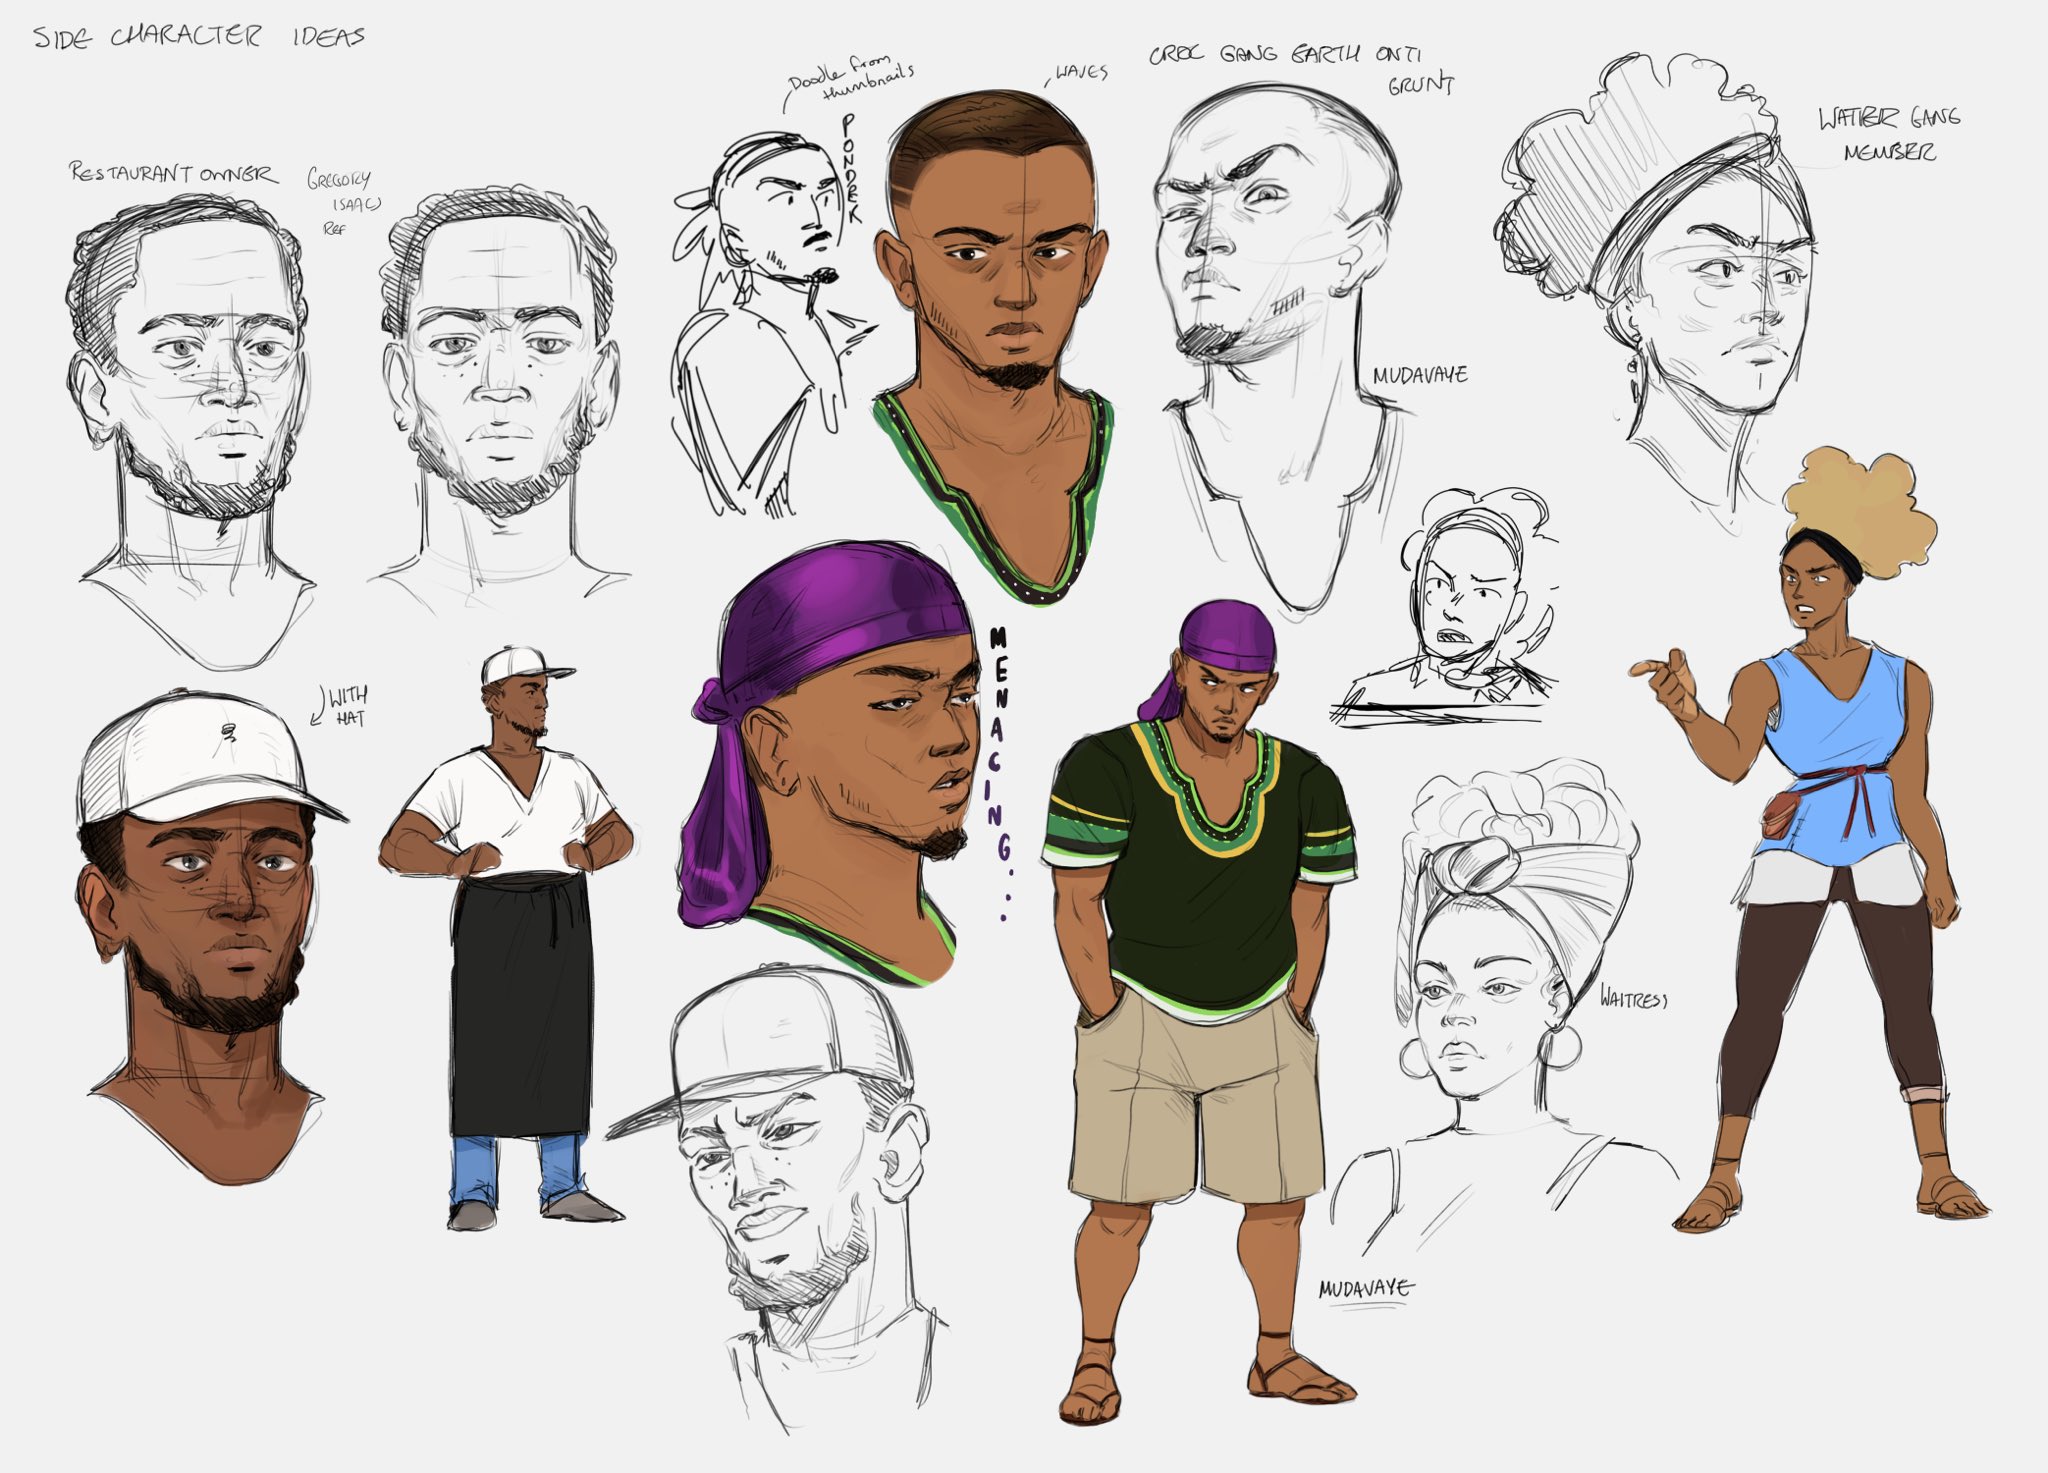 â€œSome ideas for minor characters in my story Dude with the durag has Earth ...